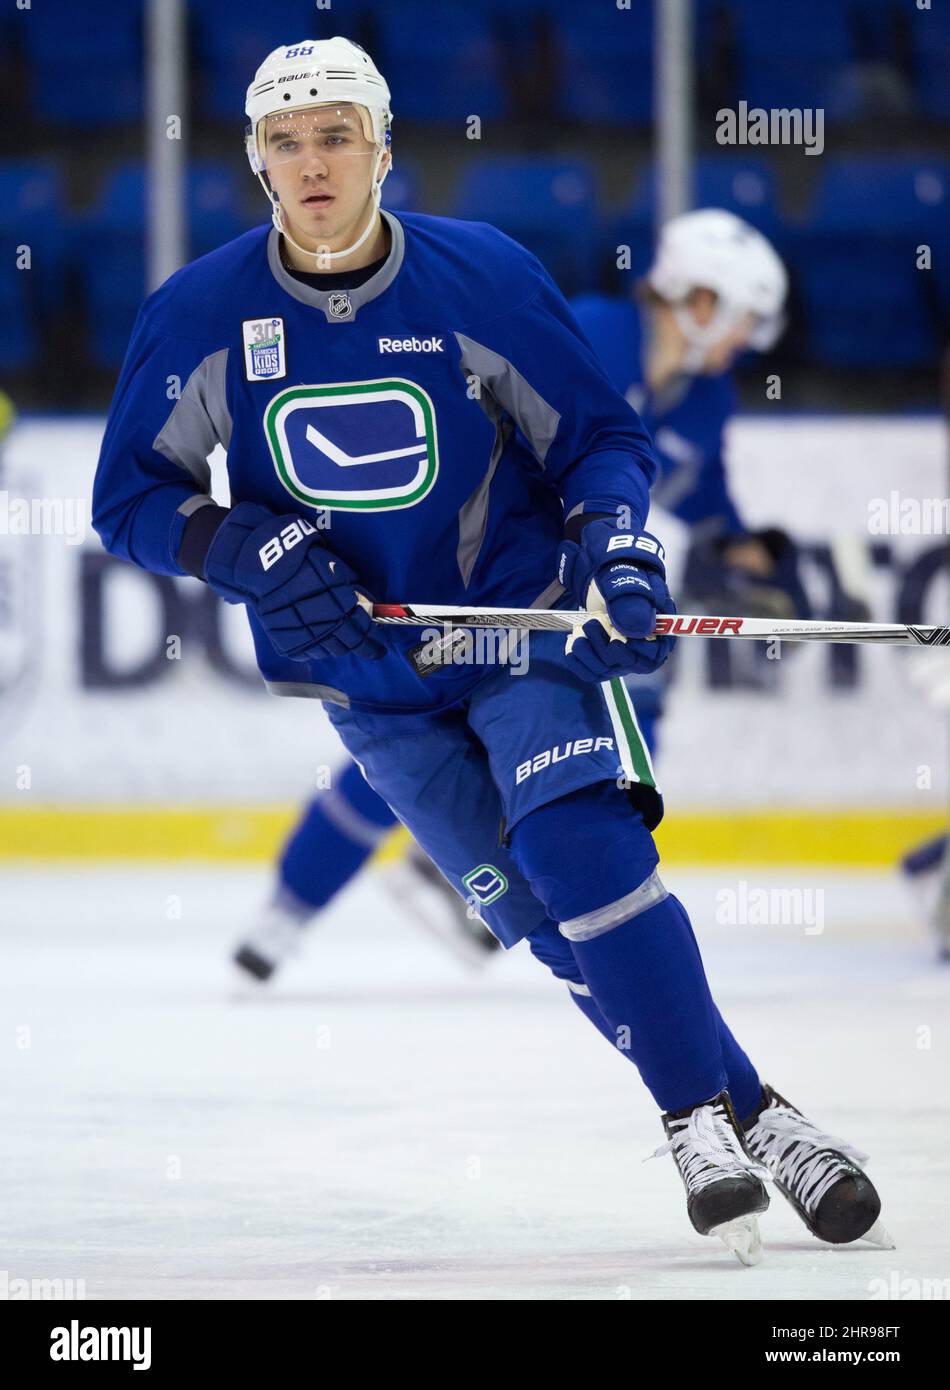 Vancouver Canucks' defenceman Nikita Tryamkin, of Russia, skates during NHL  hockey practice in Vancouver, B.C., on Friday March 11, 2016. Tryamkin  signed a contract with the Canucks earlier this week after playing